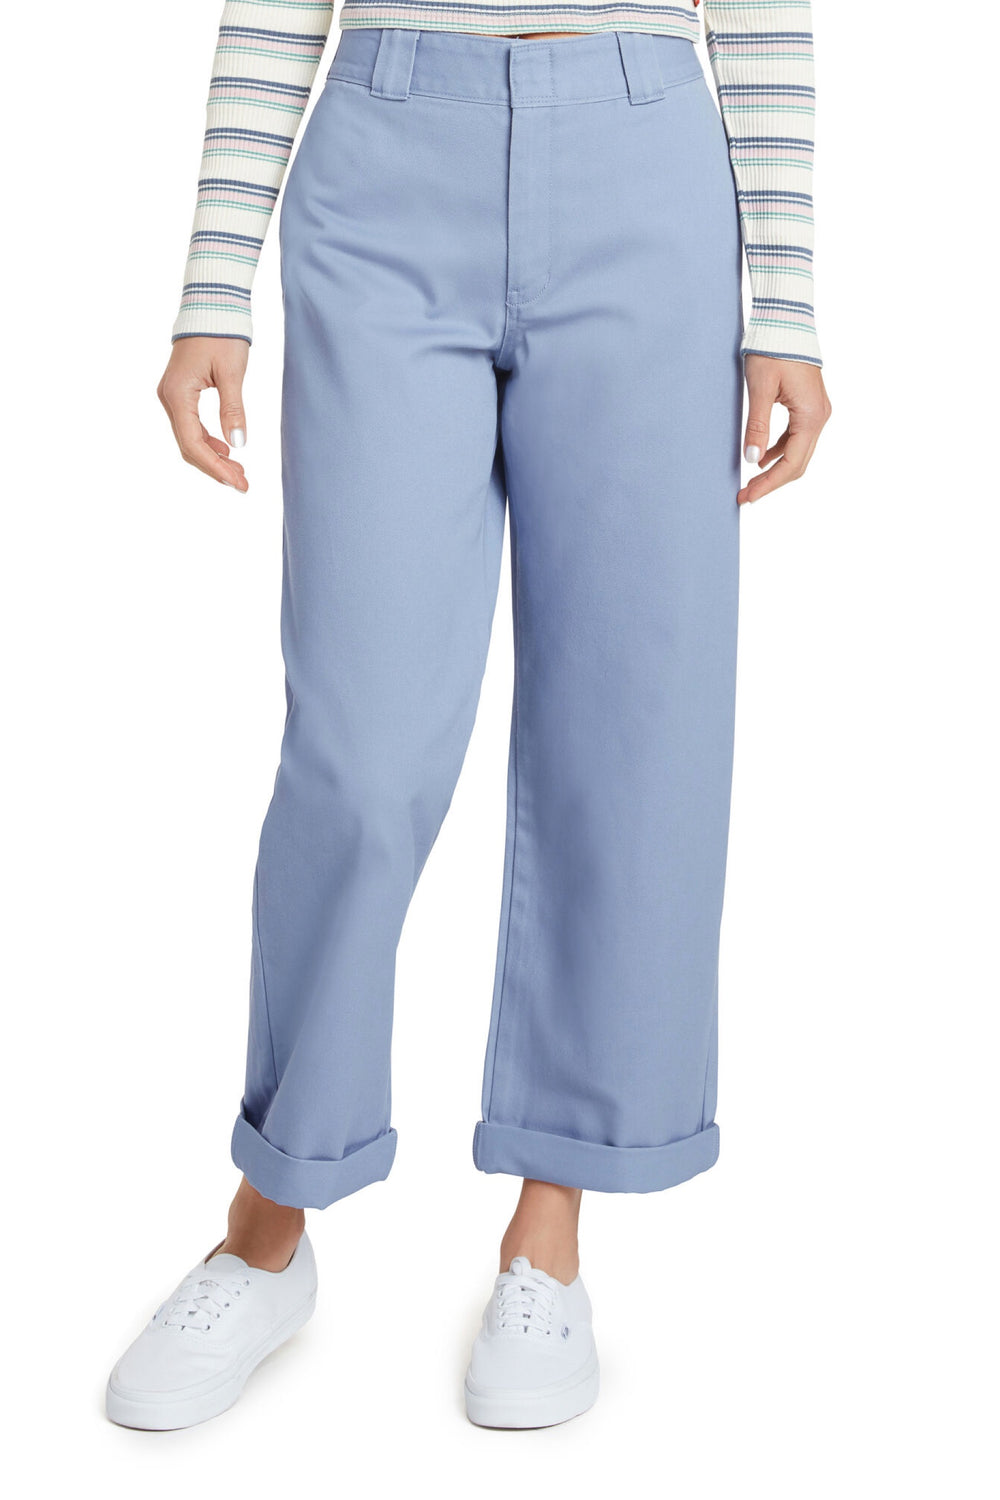 Work Crop Pant - Chambray Blue